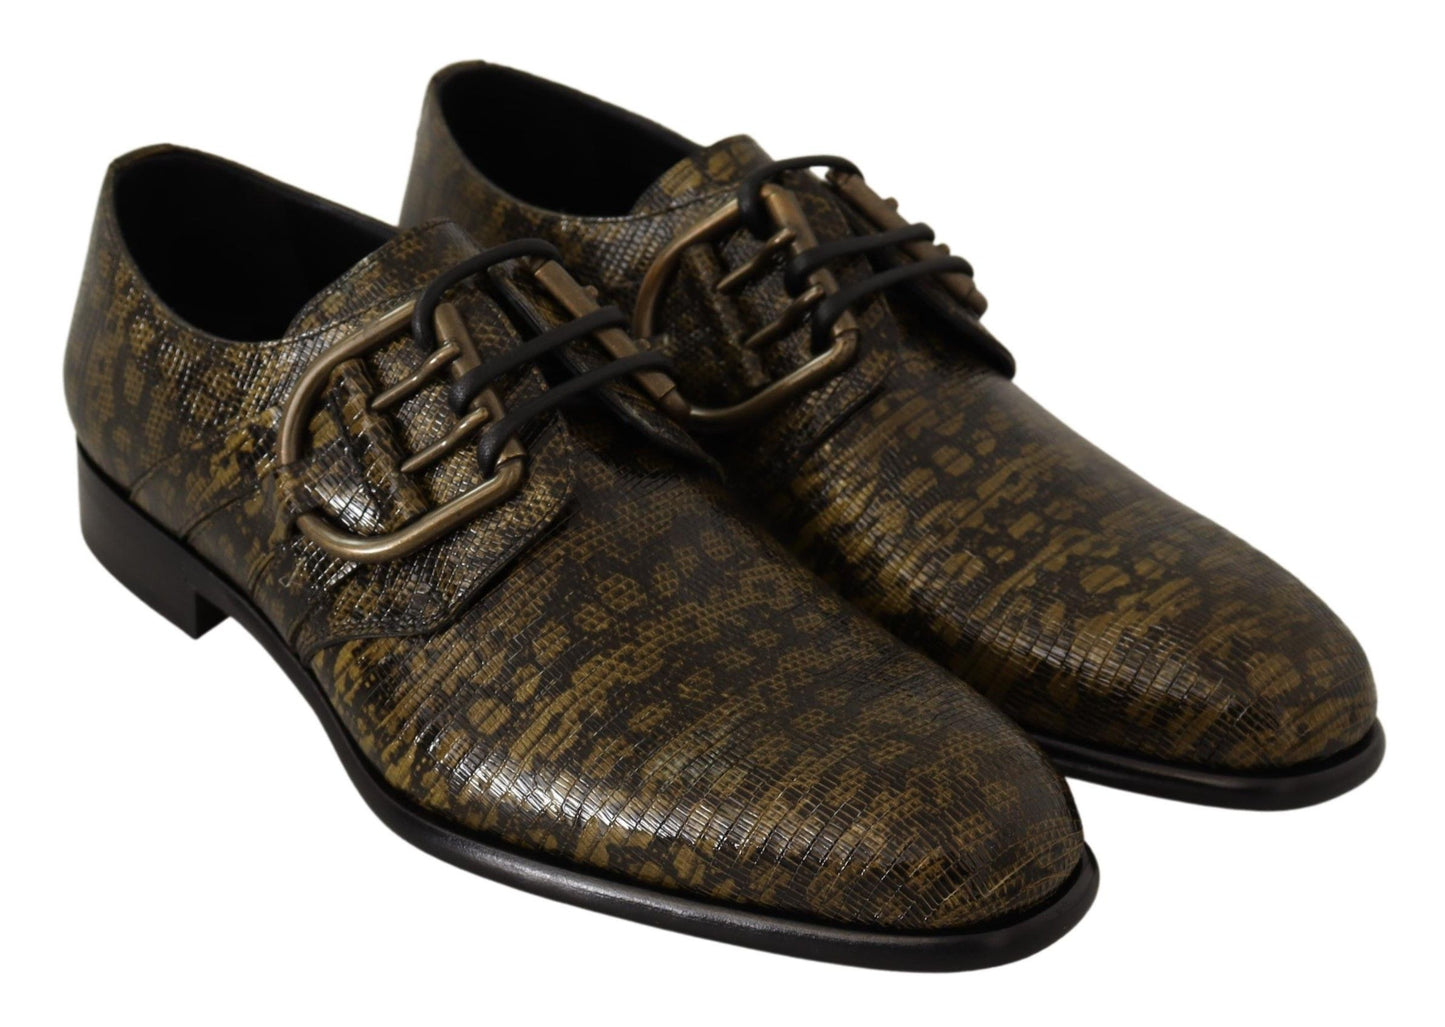 Exquisite Green Lizard Leather Derby Shoes